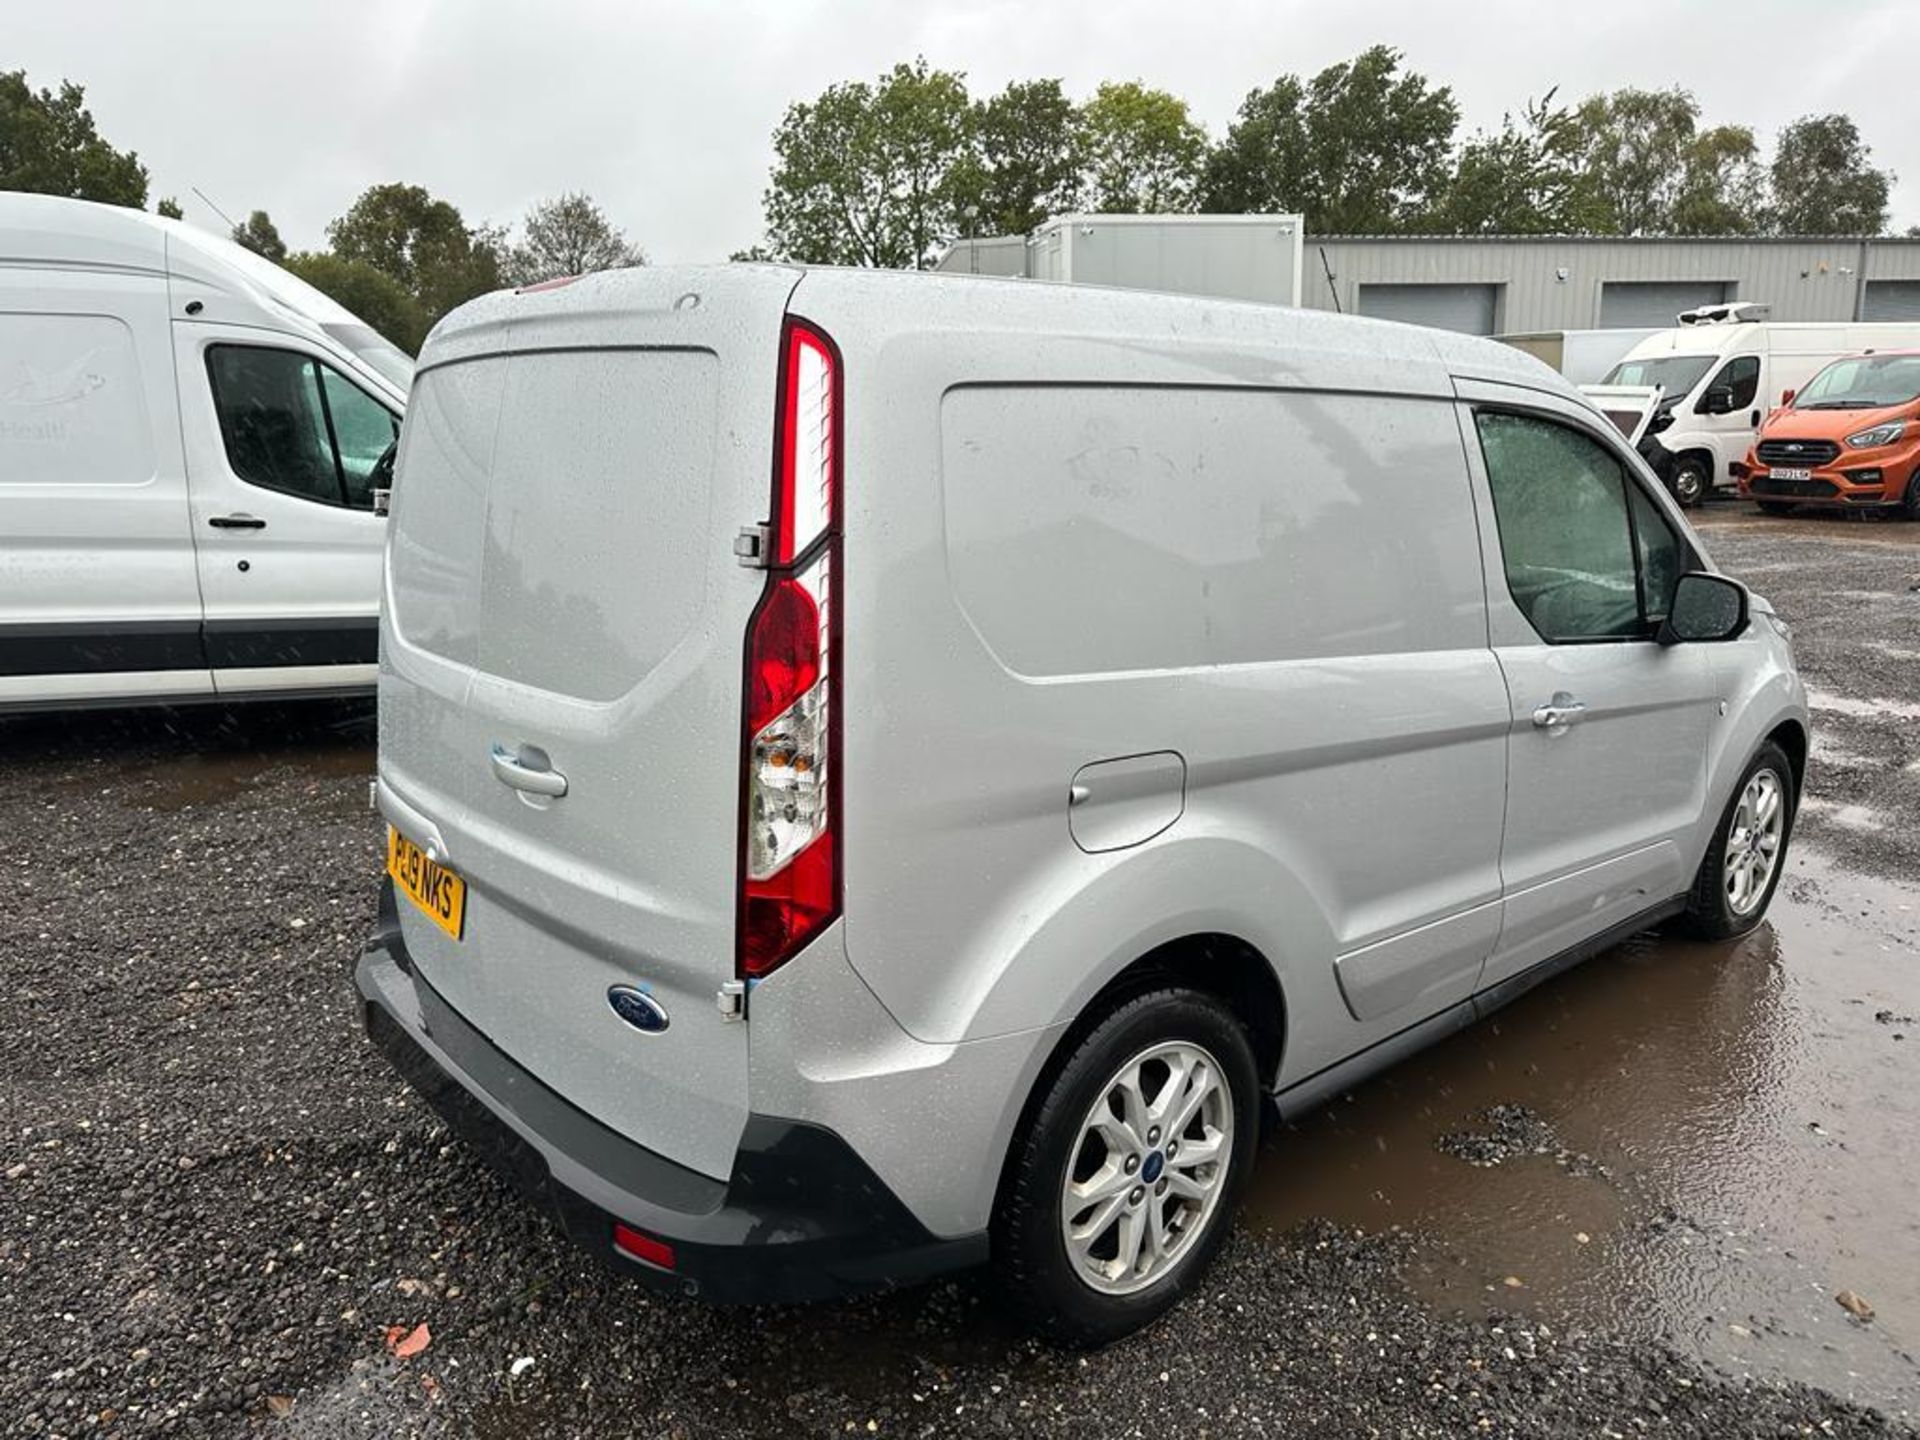 2019 19 FORD TRANSIT CONNECT LIMITED AUTOMATIC PANEL VAN - 123K MILES - ALLOY WHEELS - AIR CON  - Image 9 of 10